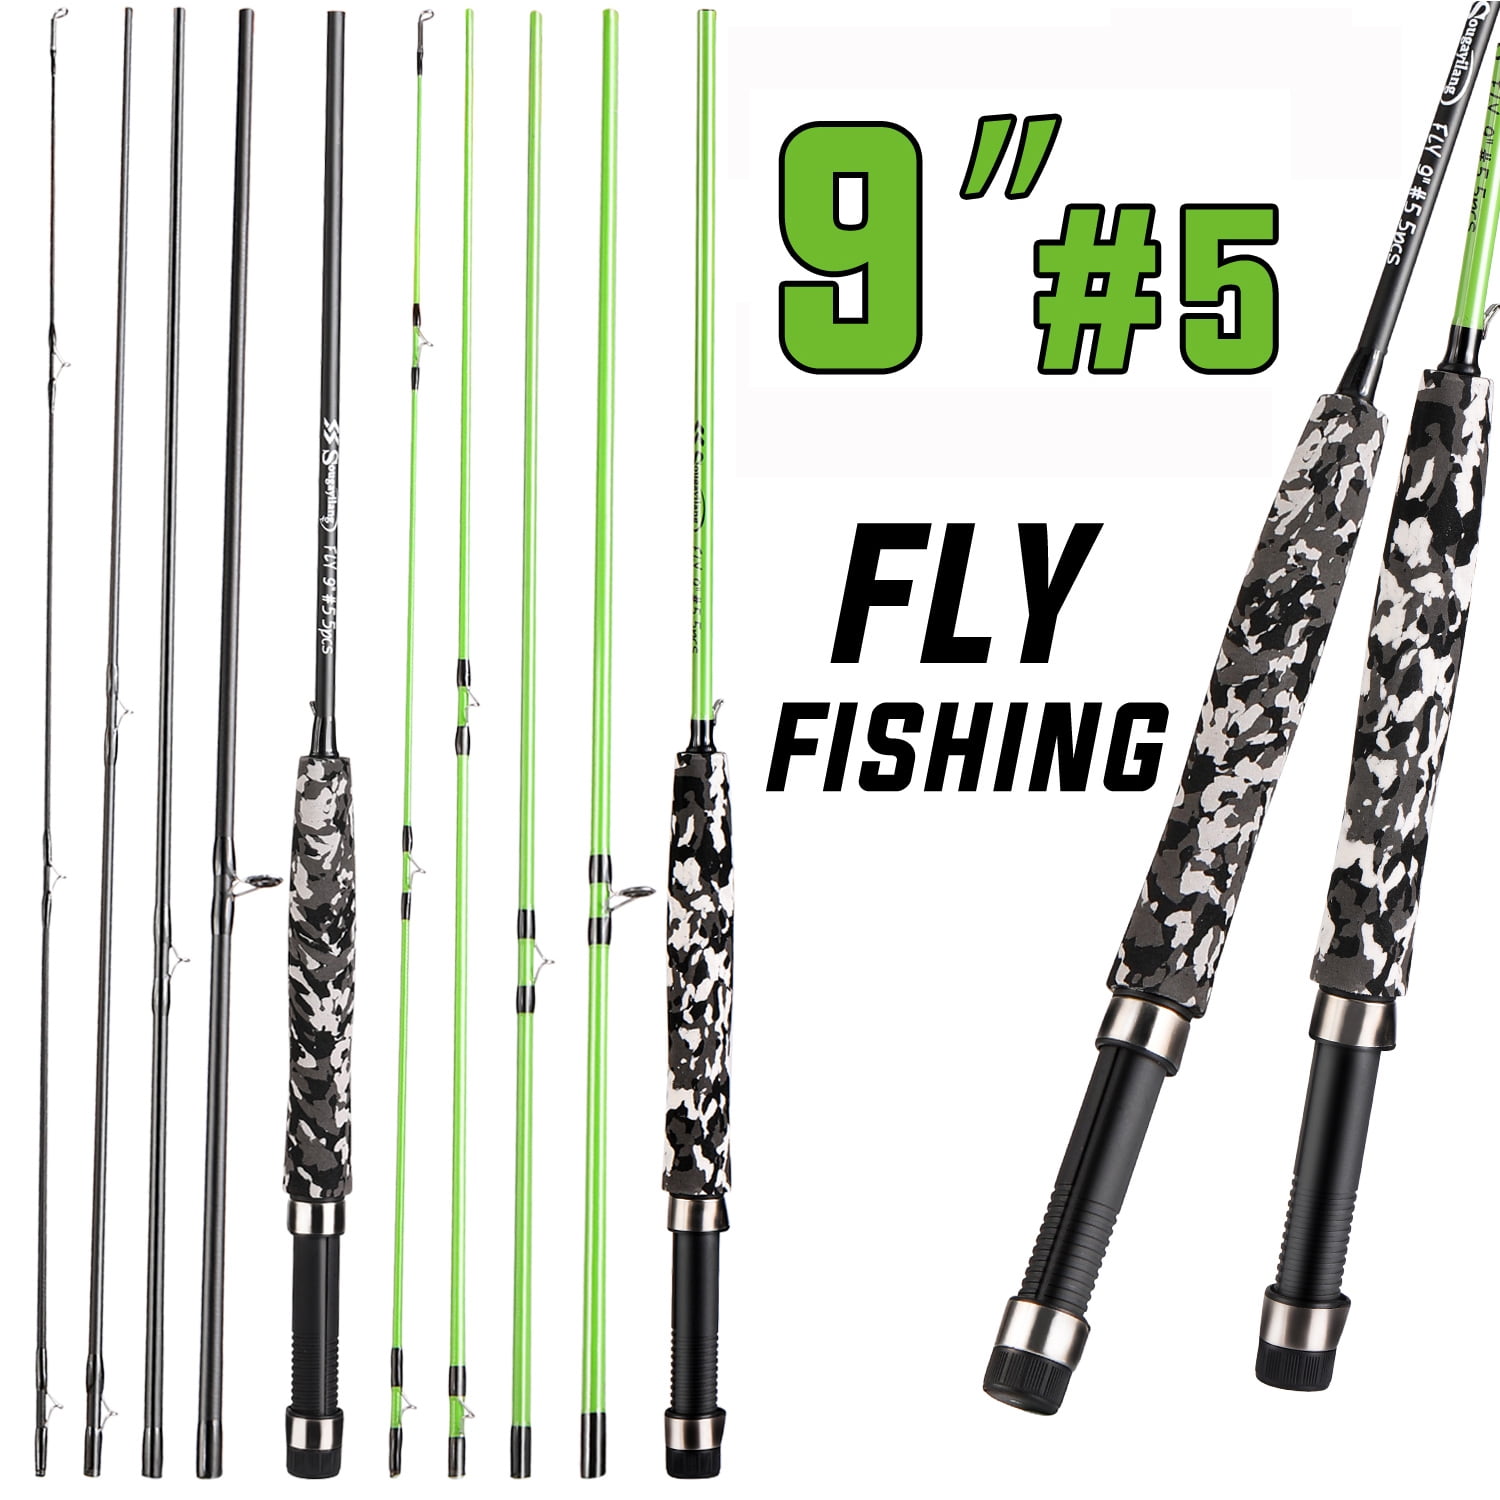 Vision ONKI 4pce Fly Fishing Rods ‘2019 Best Sellers’ 